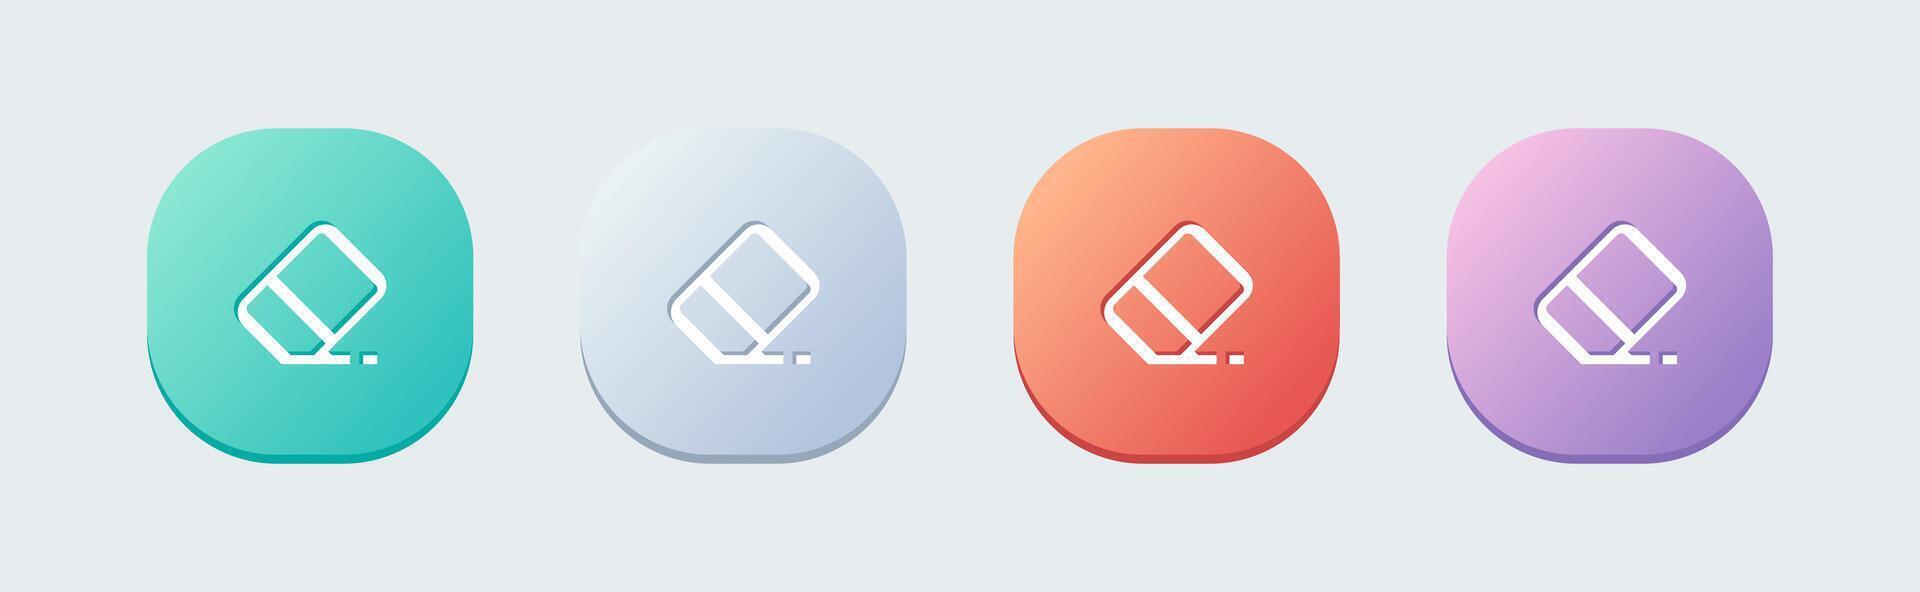 Eraser line icon in flat design style. Wipe out signs vector illustration.